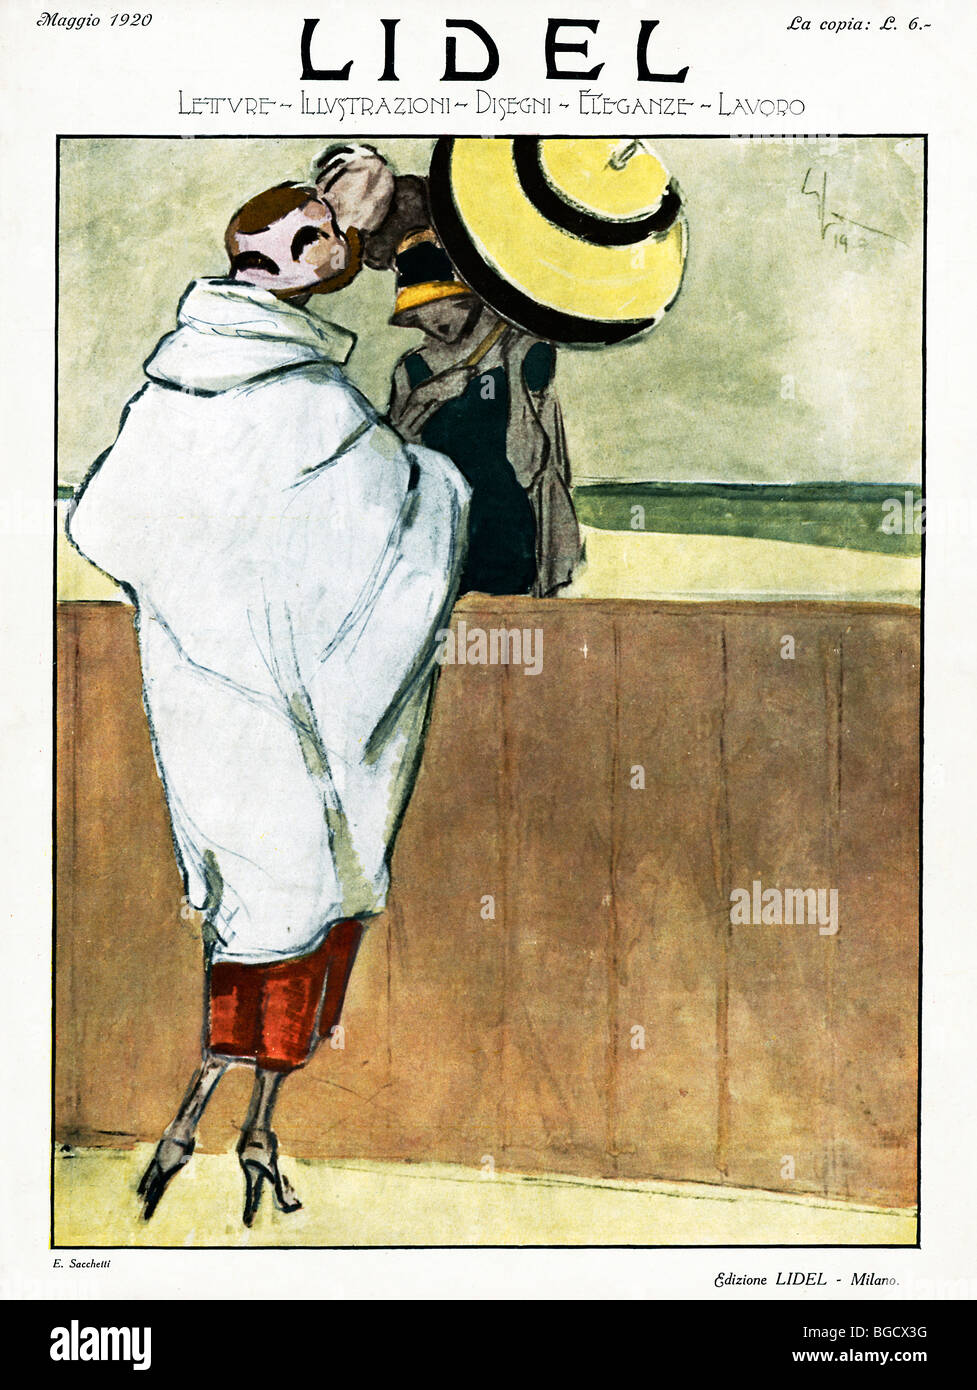 Lidel, 1920 cover of the Italian fashion and lifestyle magazine published  in Milan, elegant ladies on holiday Stock Photo - Alamy